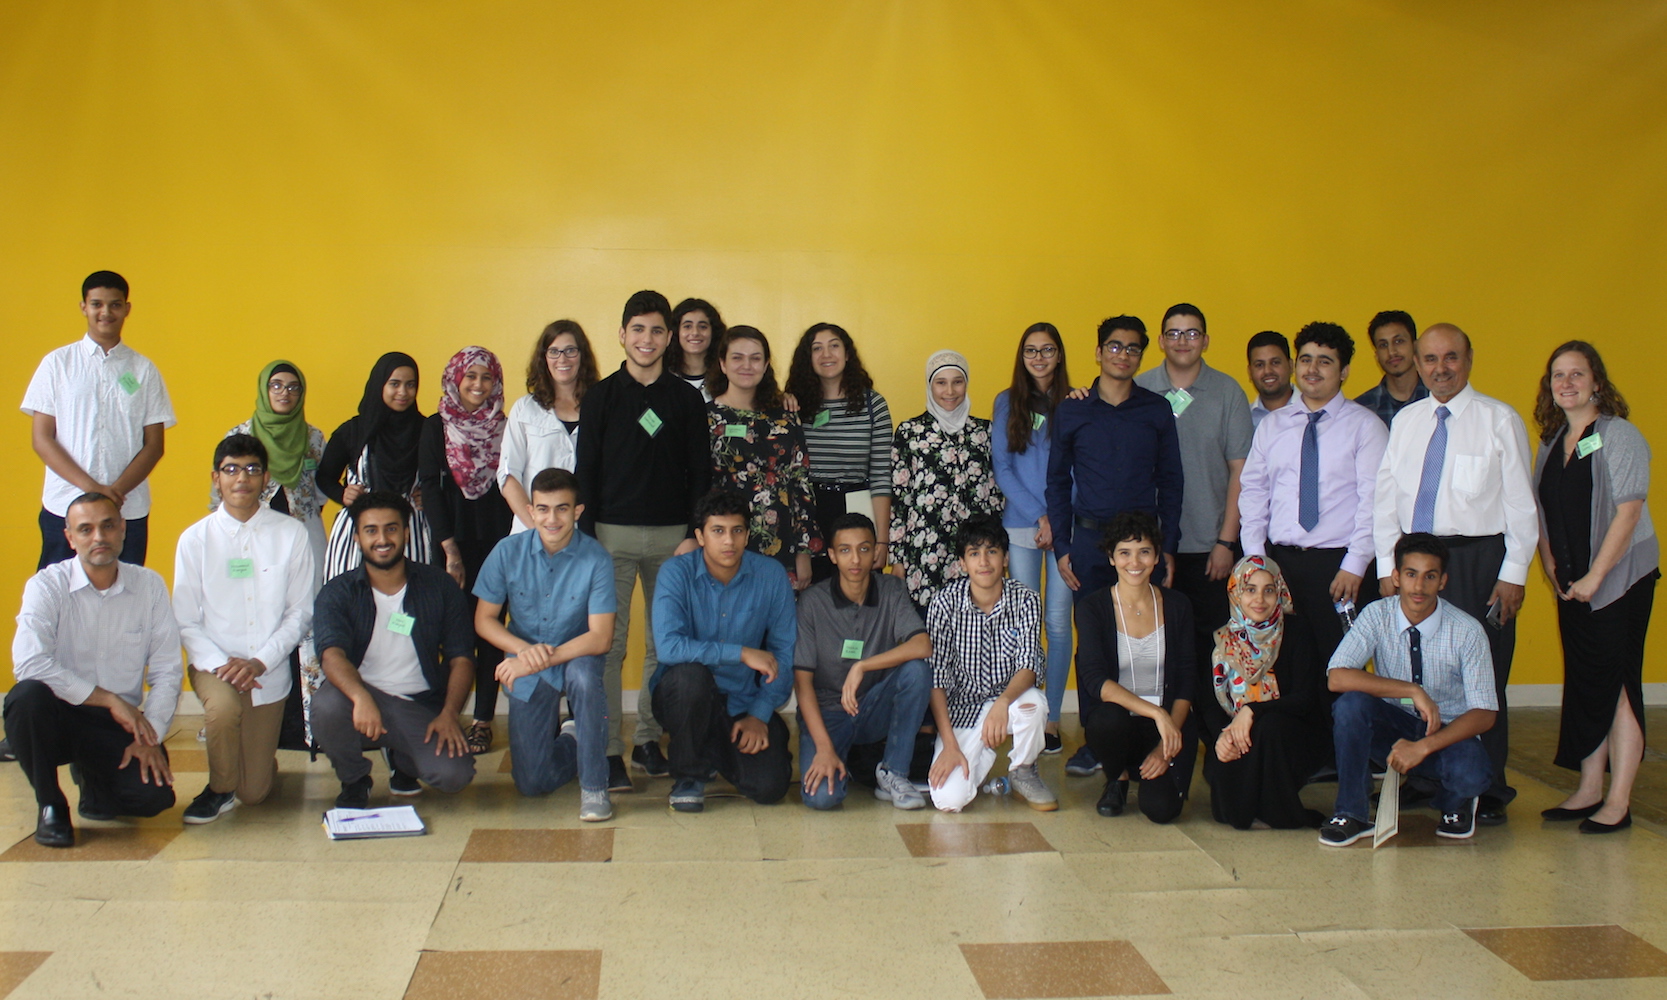 The EHRA academy gathers together for a group picture.